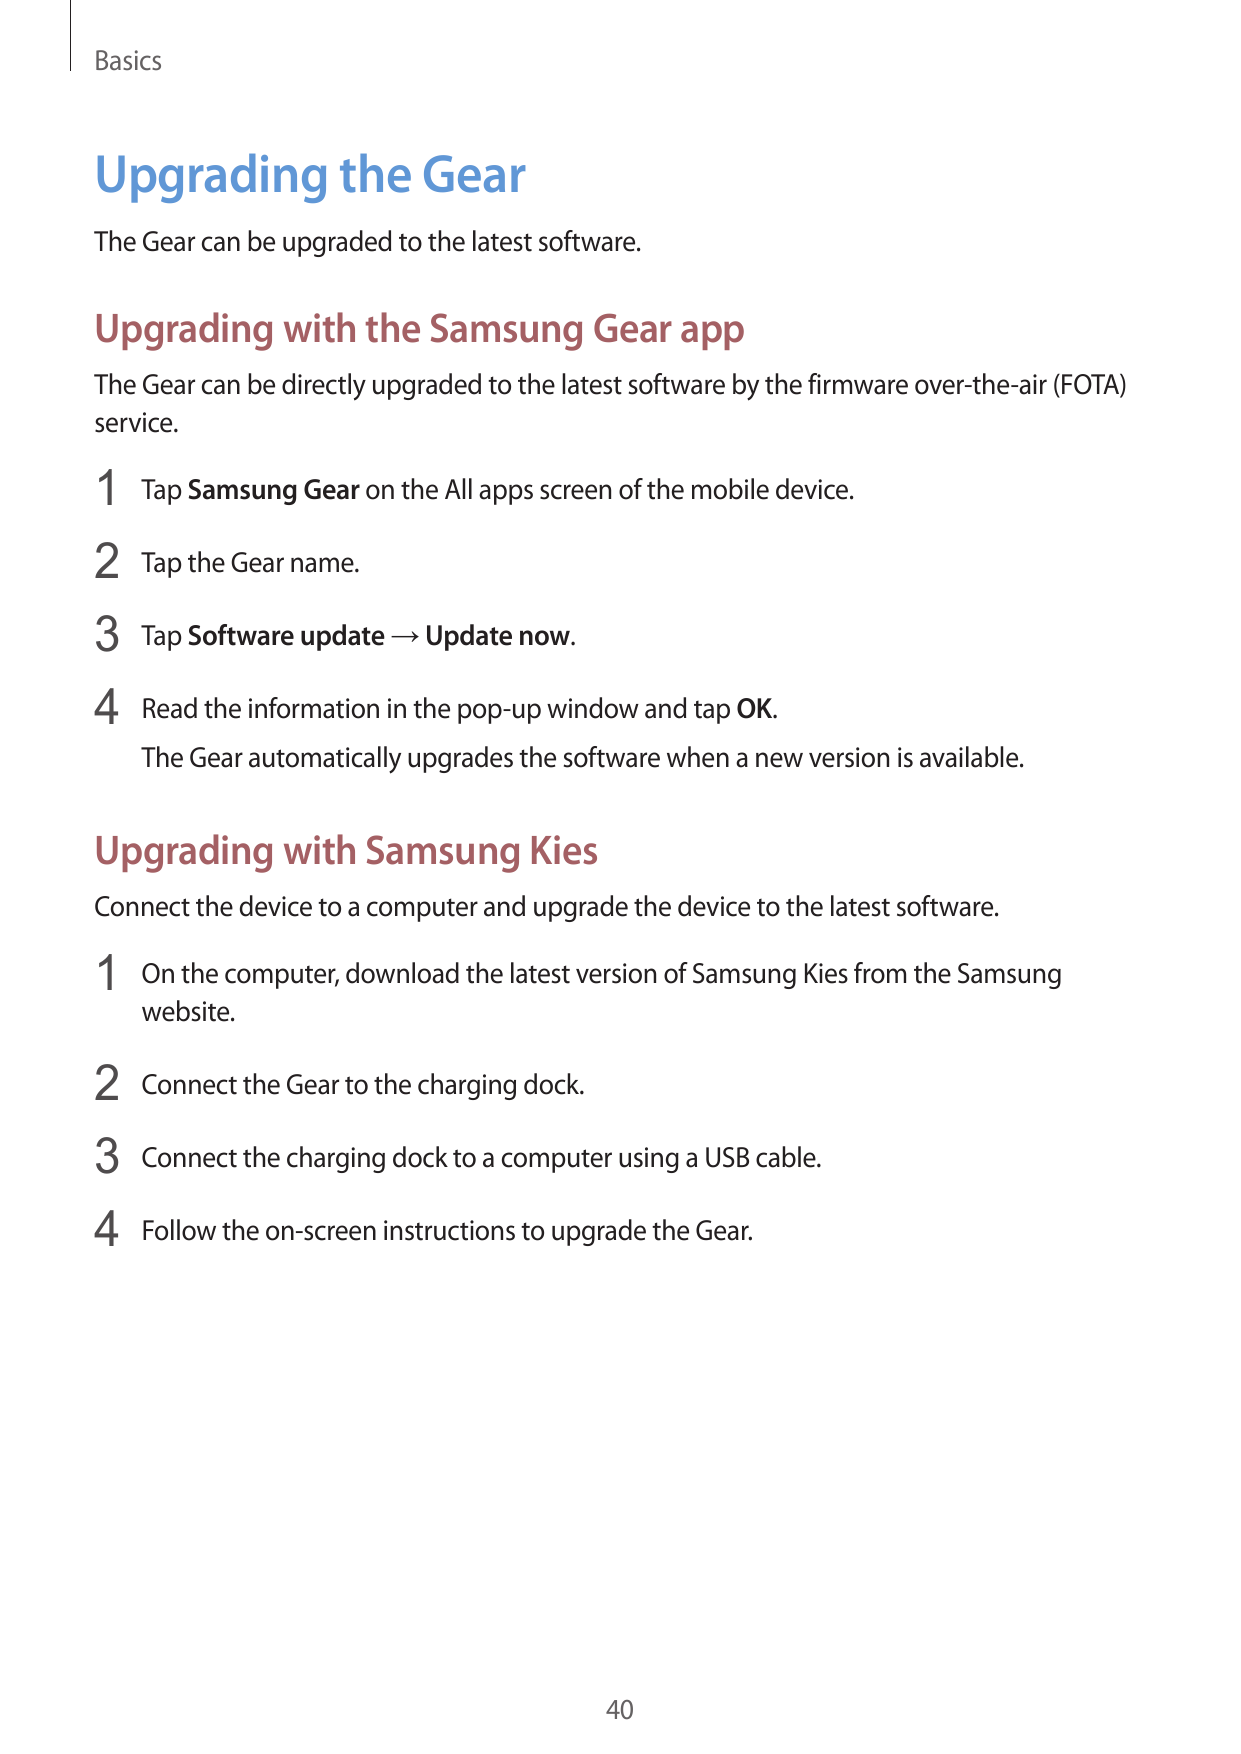 BasicsUpgrading the GearThe Gear can be upgraded to the latest software.Upgrading with the Samsung Gear appThe Gear can be direc